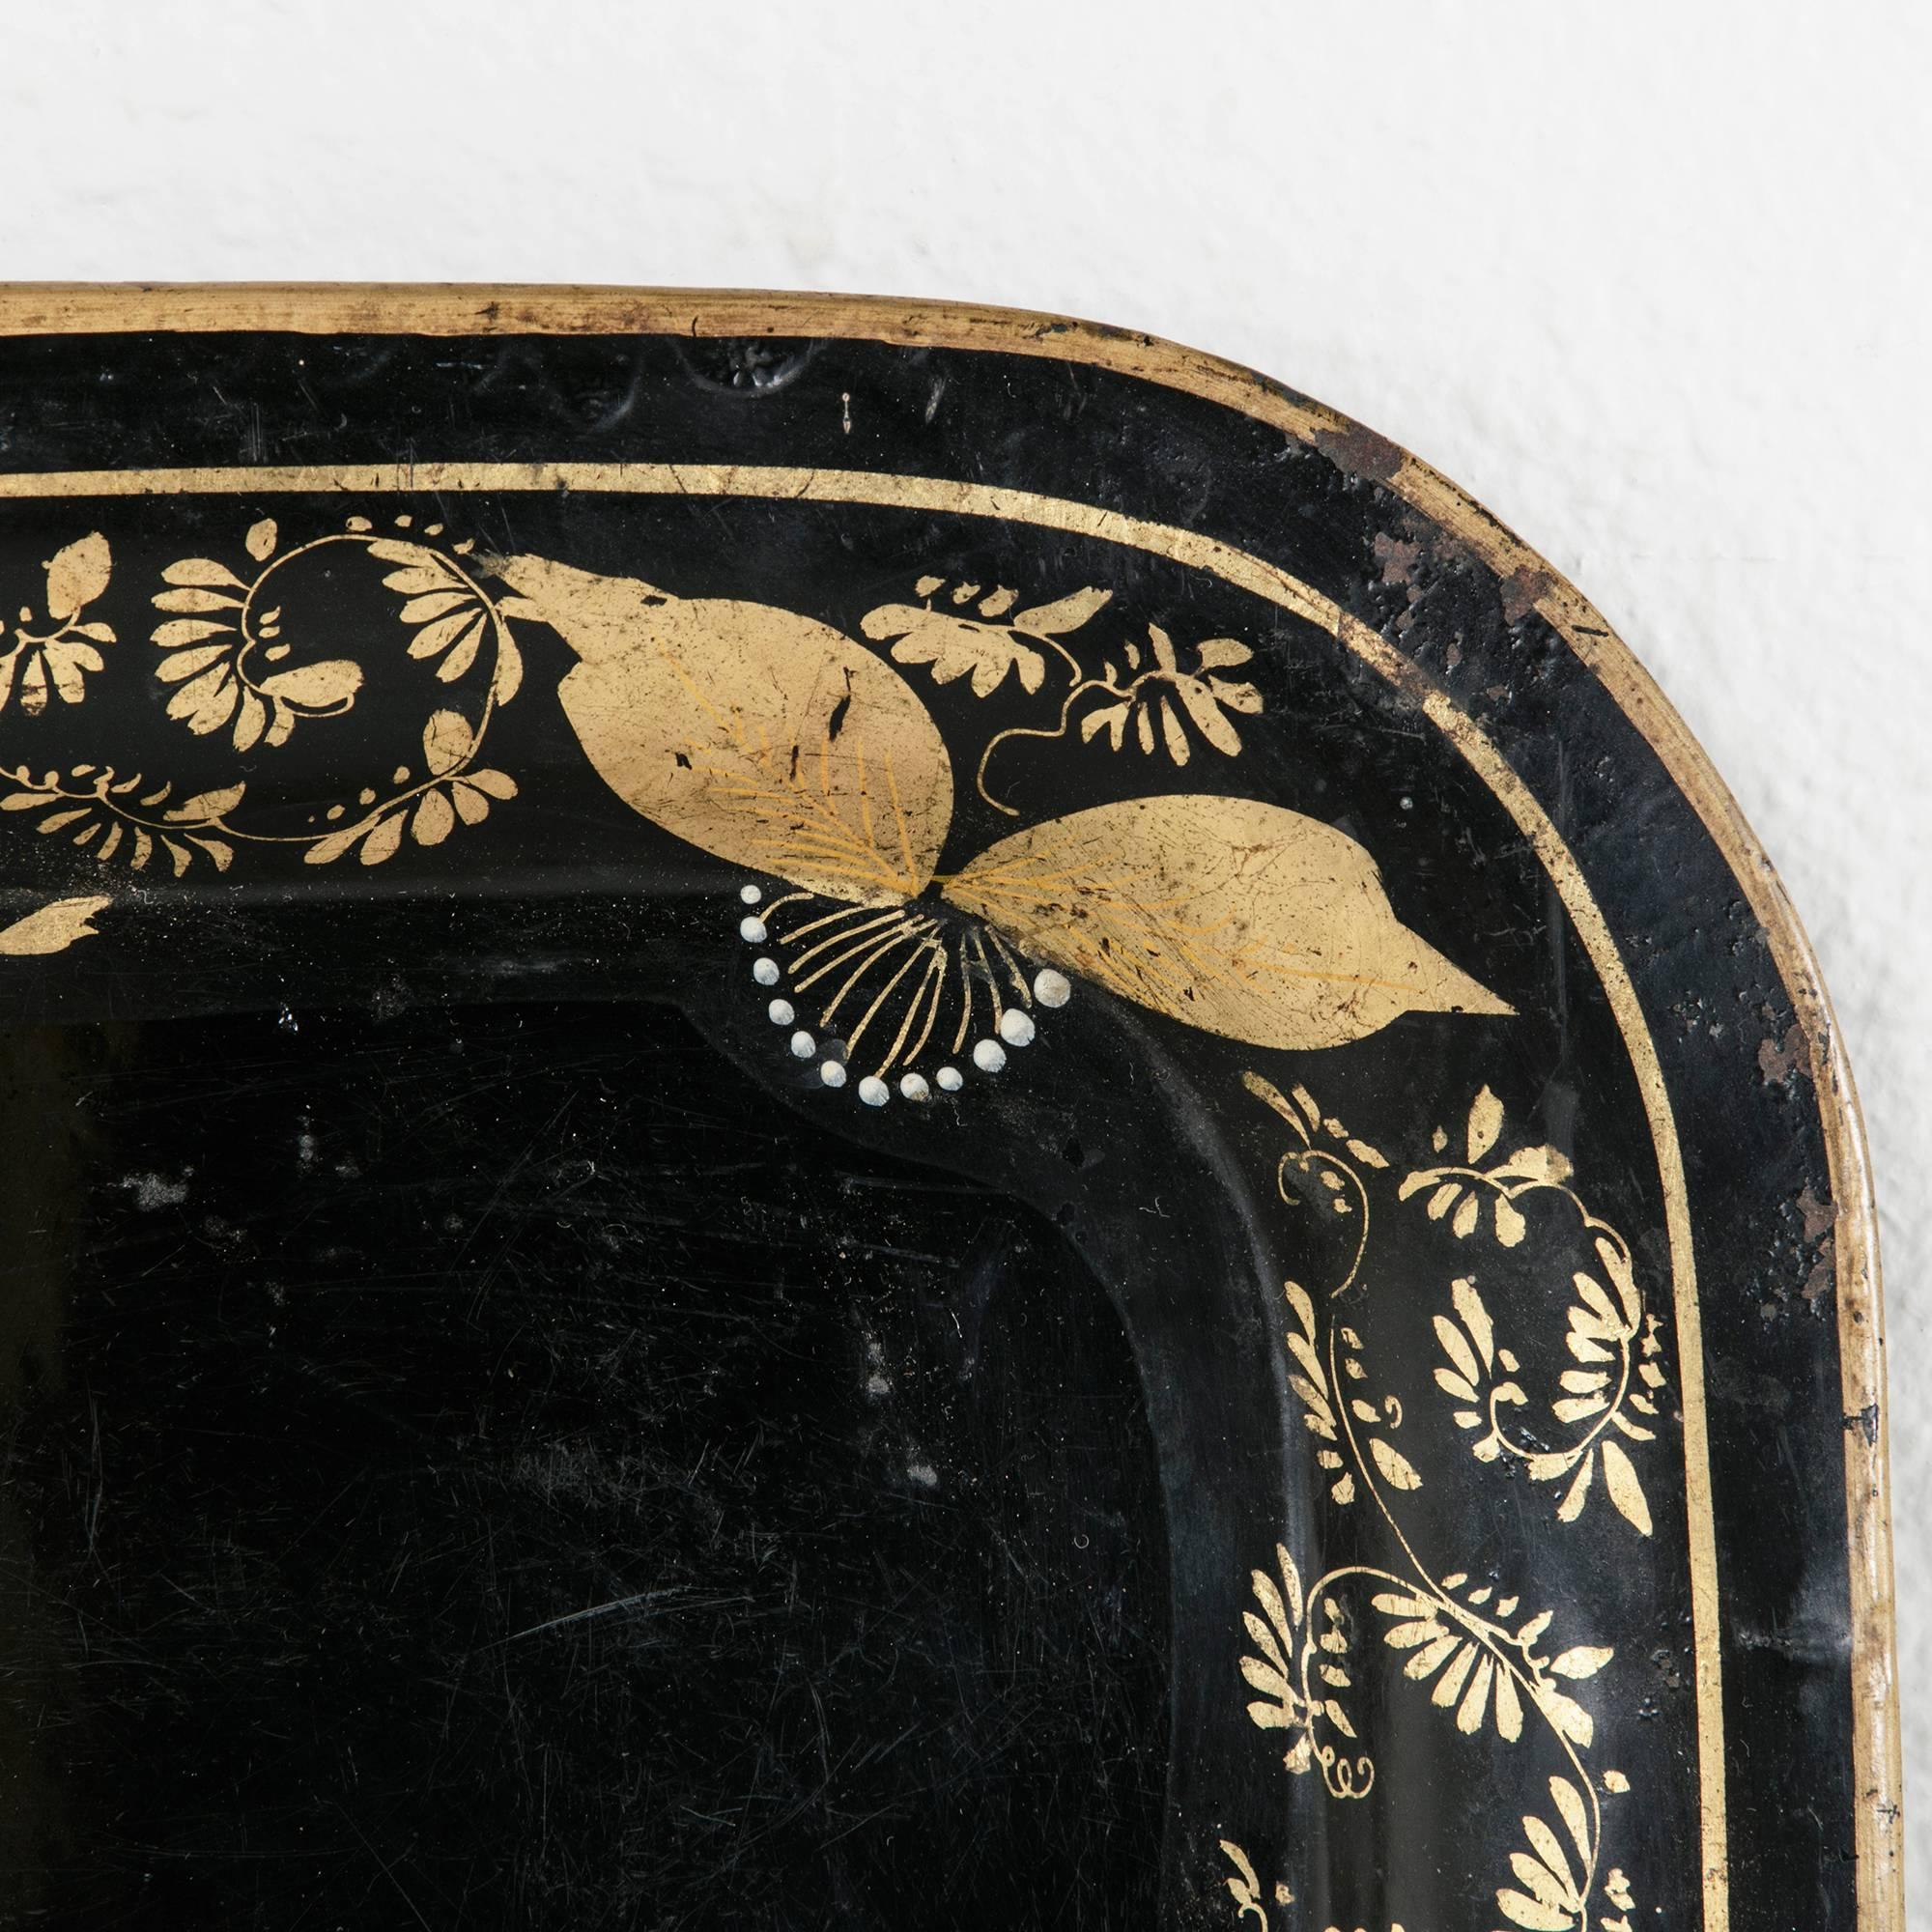 This hand-painted 19th century tray features groupings of large leaves painted in gold interspersed with delicate, curling branches around its perimeter. Its central black field would give prominence to a collection of fine objects displayed on top.